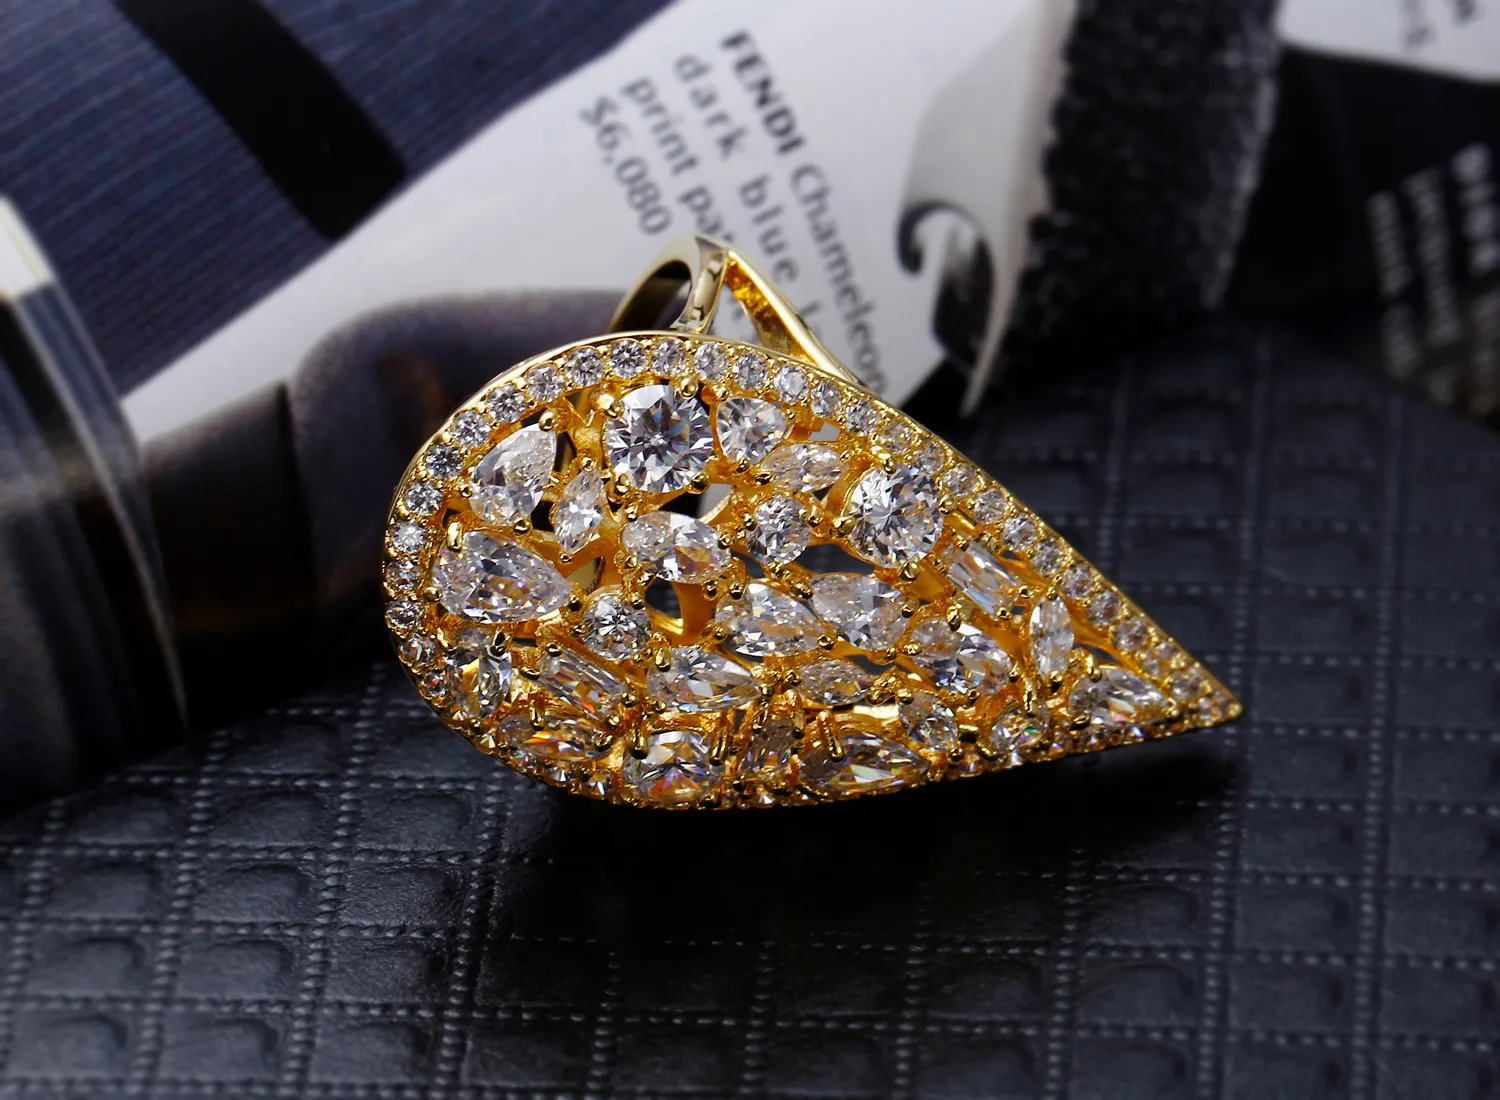 Nice Beautyful Ring! Big water drop shape Gold Plate Ring Pave setting Champagne cz Rings